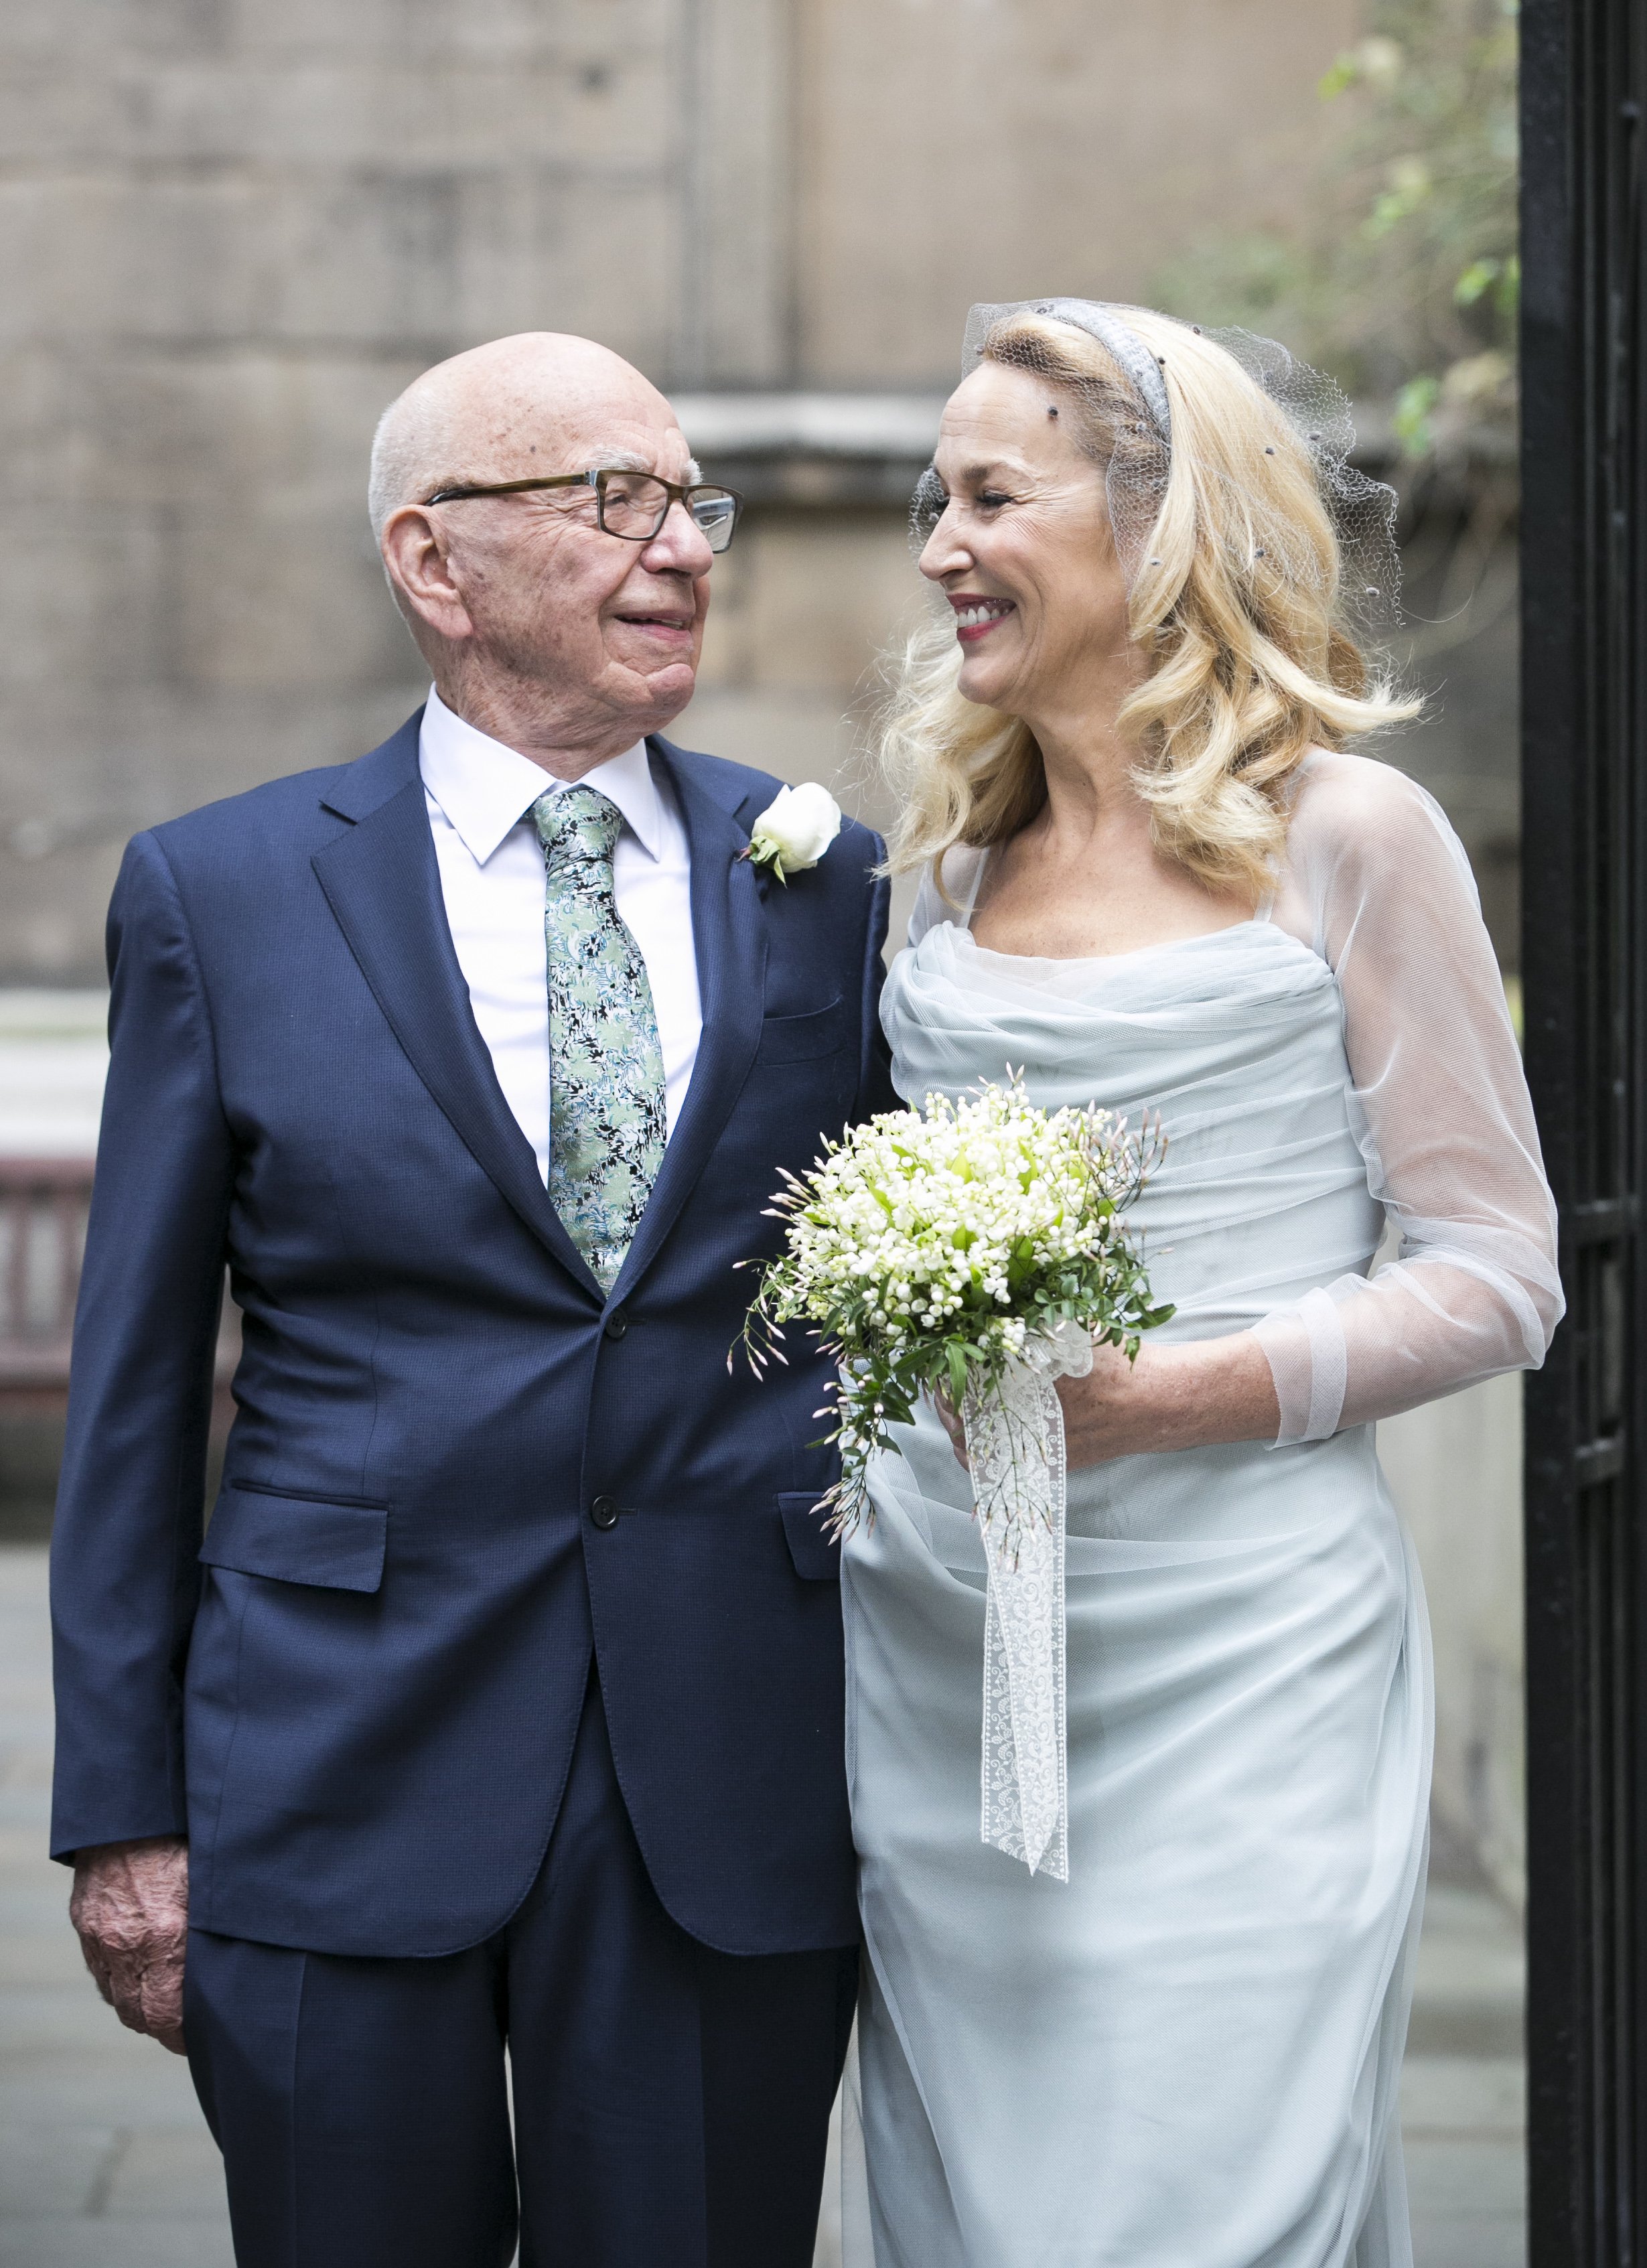 Rupert Murdoch and Jerry Hall leave St Brides Church after their wedding on March 5, 2016 in London, England.  |  Source: Getty Images